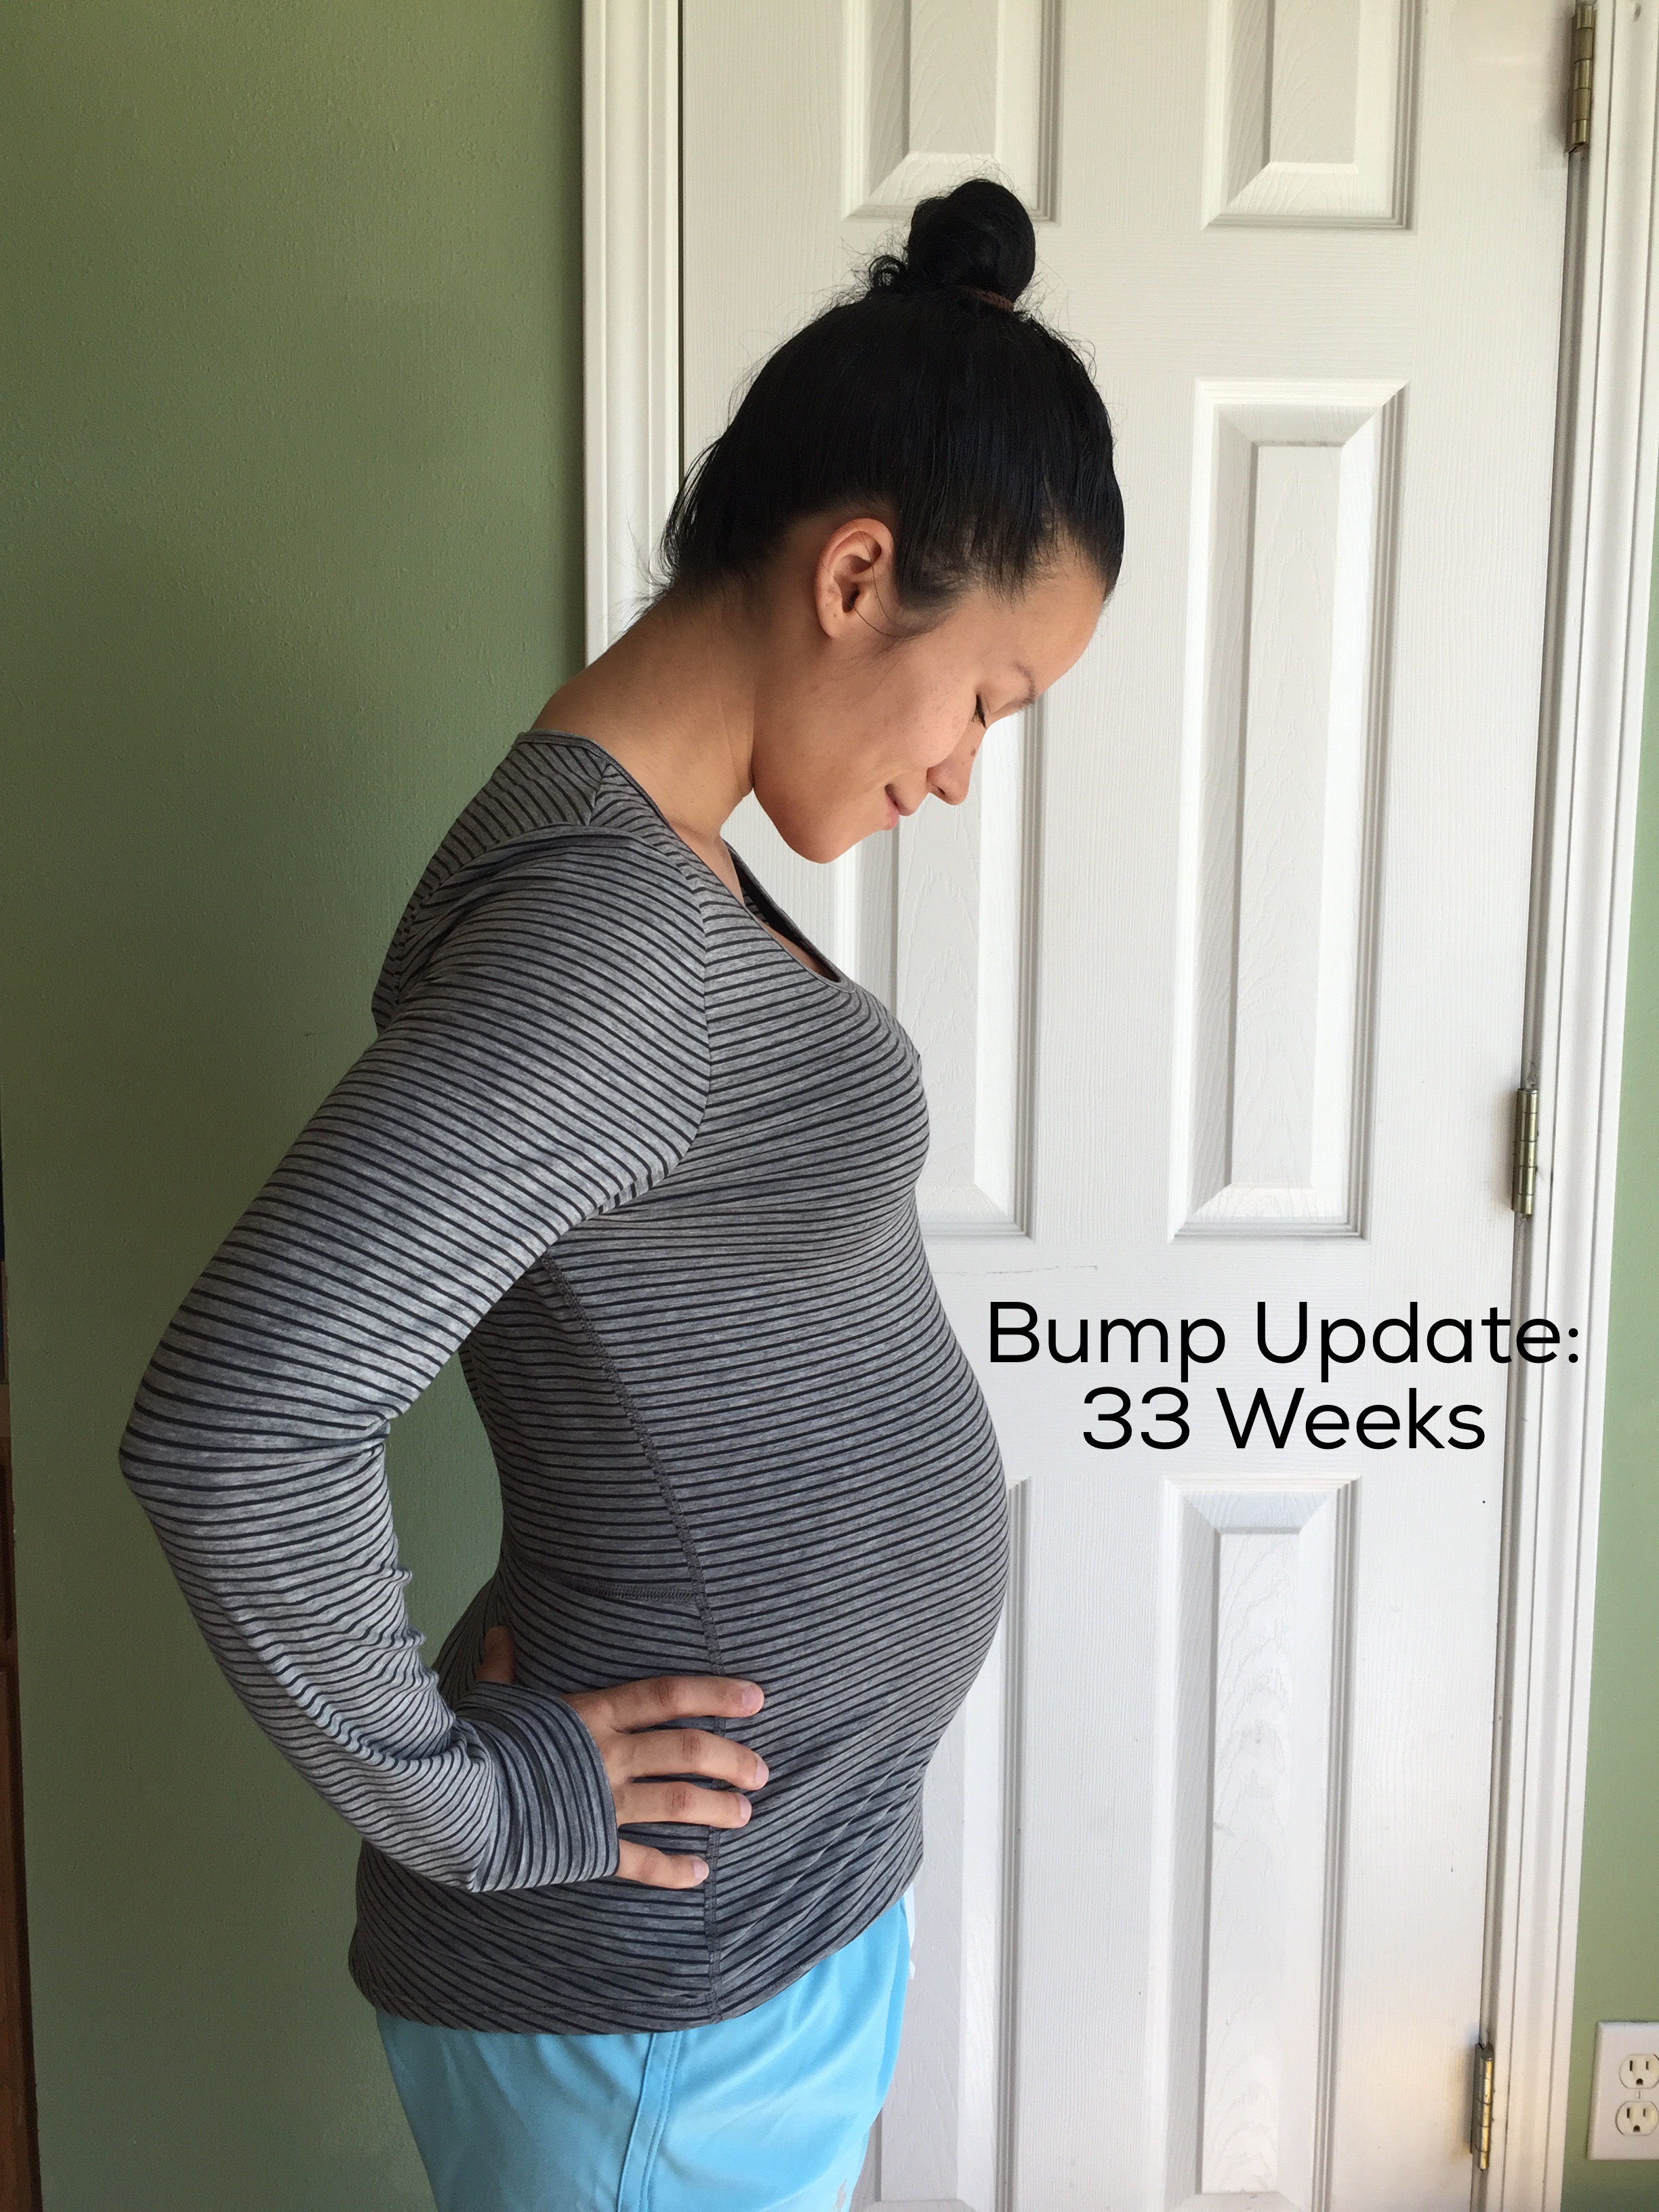 You're too small for 33 weeks!': Mum responds to 'tiny' baby bump shaming